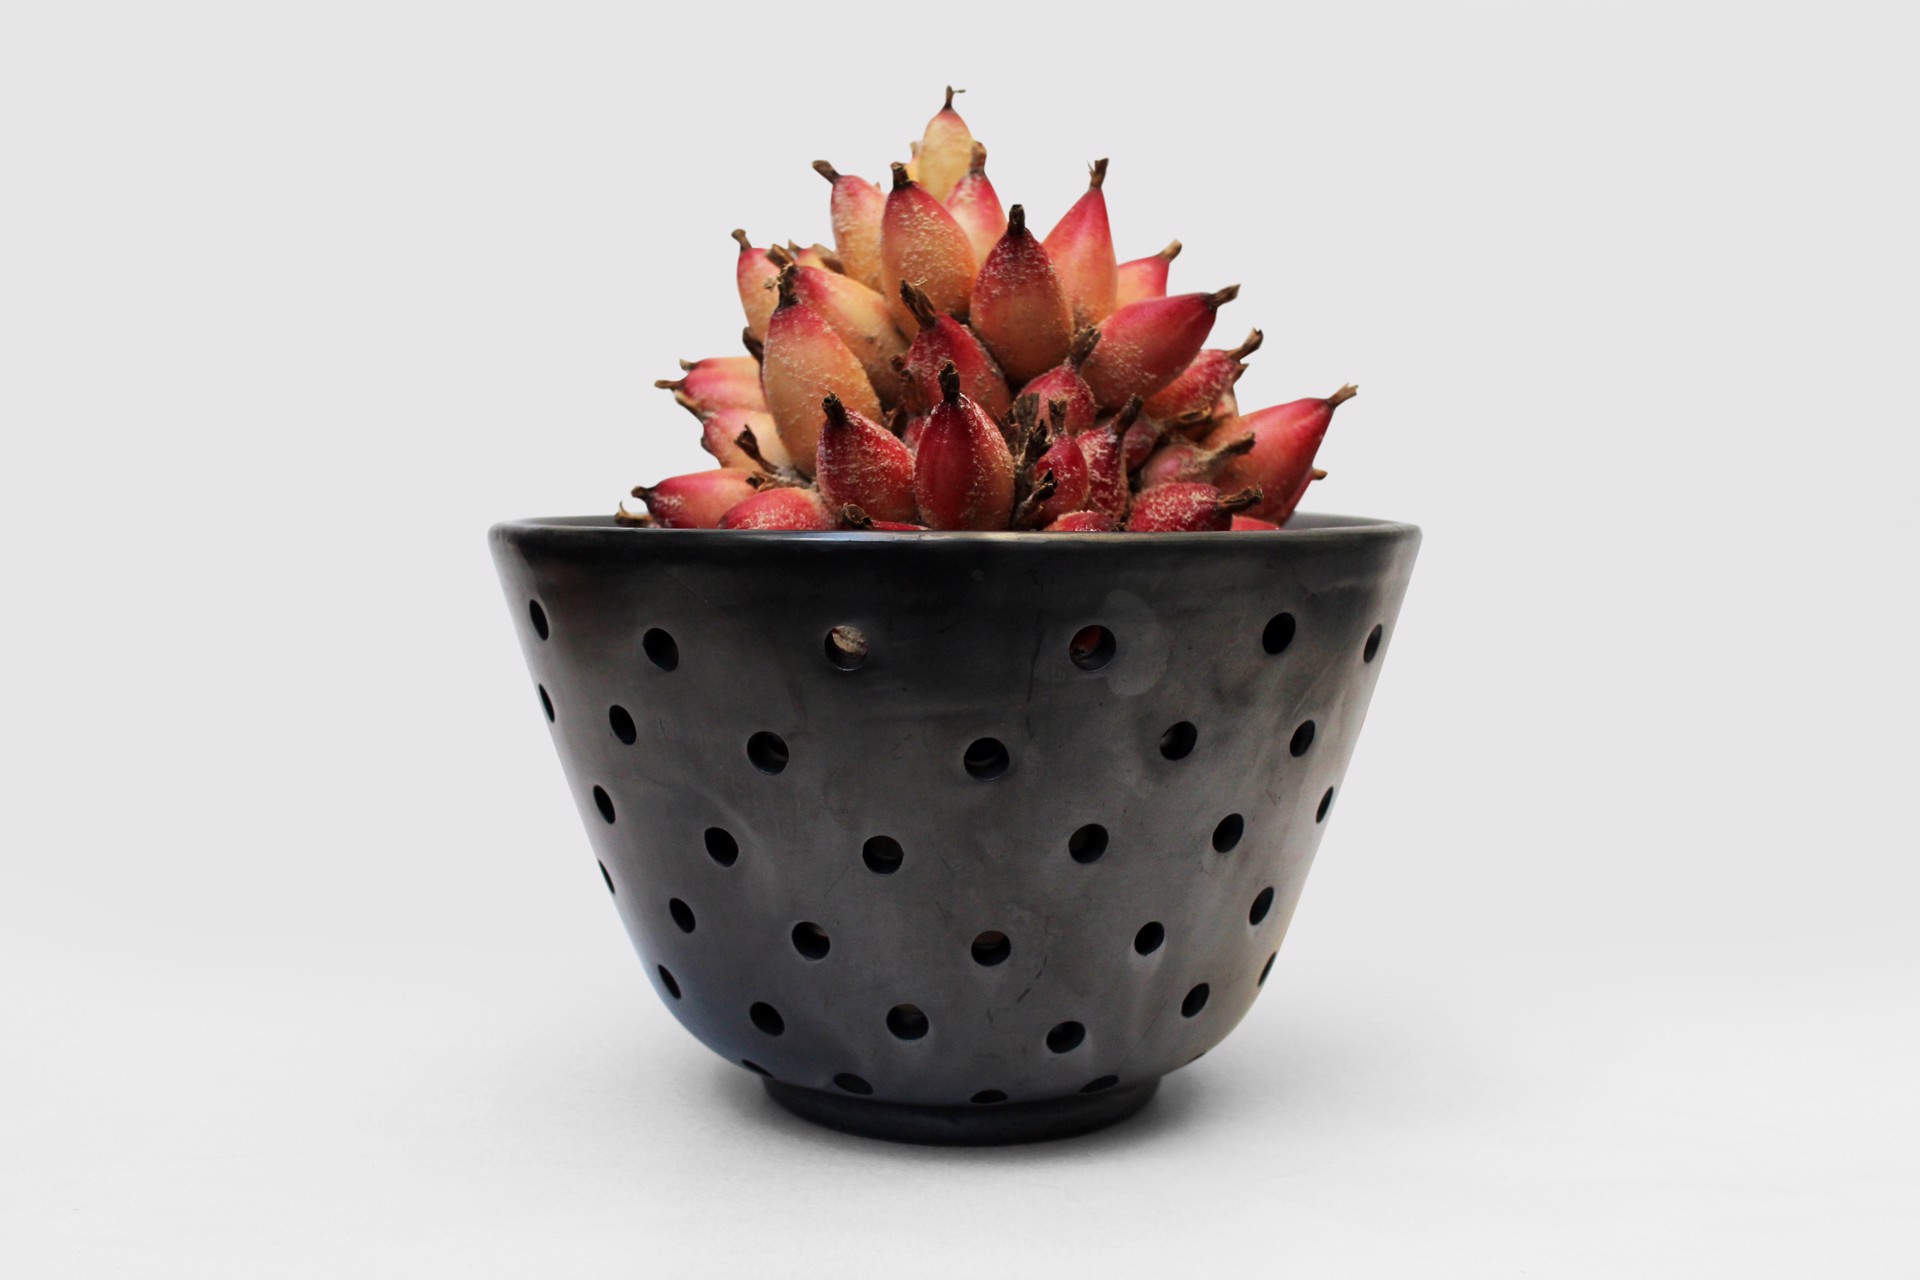 Ramón Fruit Bowl by Colectivo 1050°